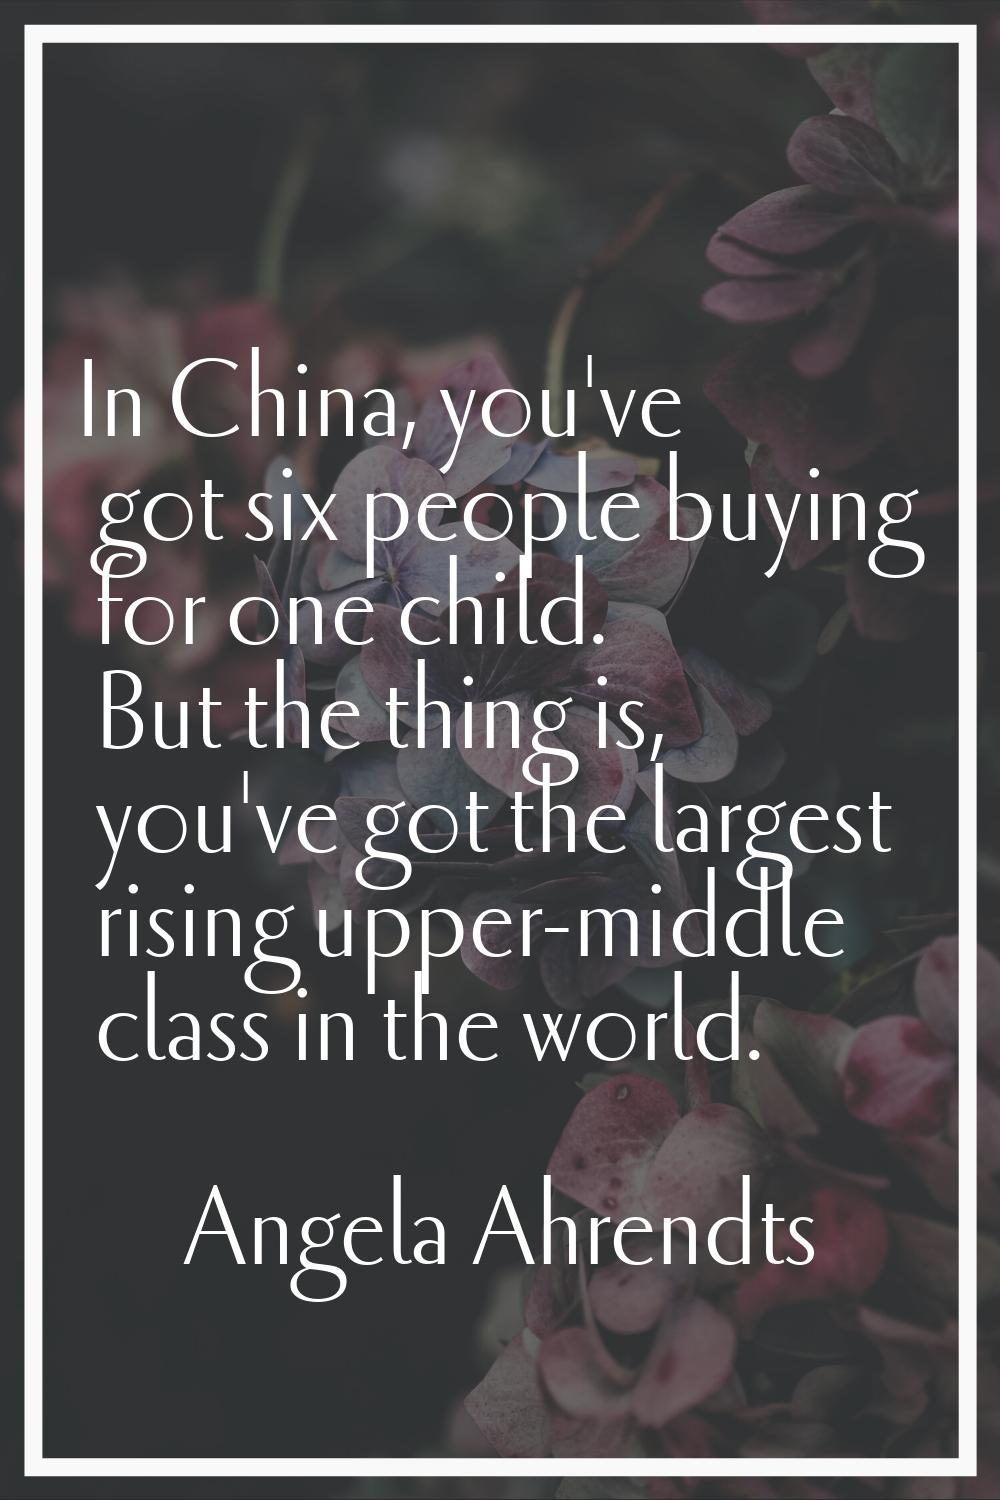 In China, you've got six people buying for one child. But the thing is, you've got the largest risi